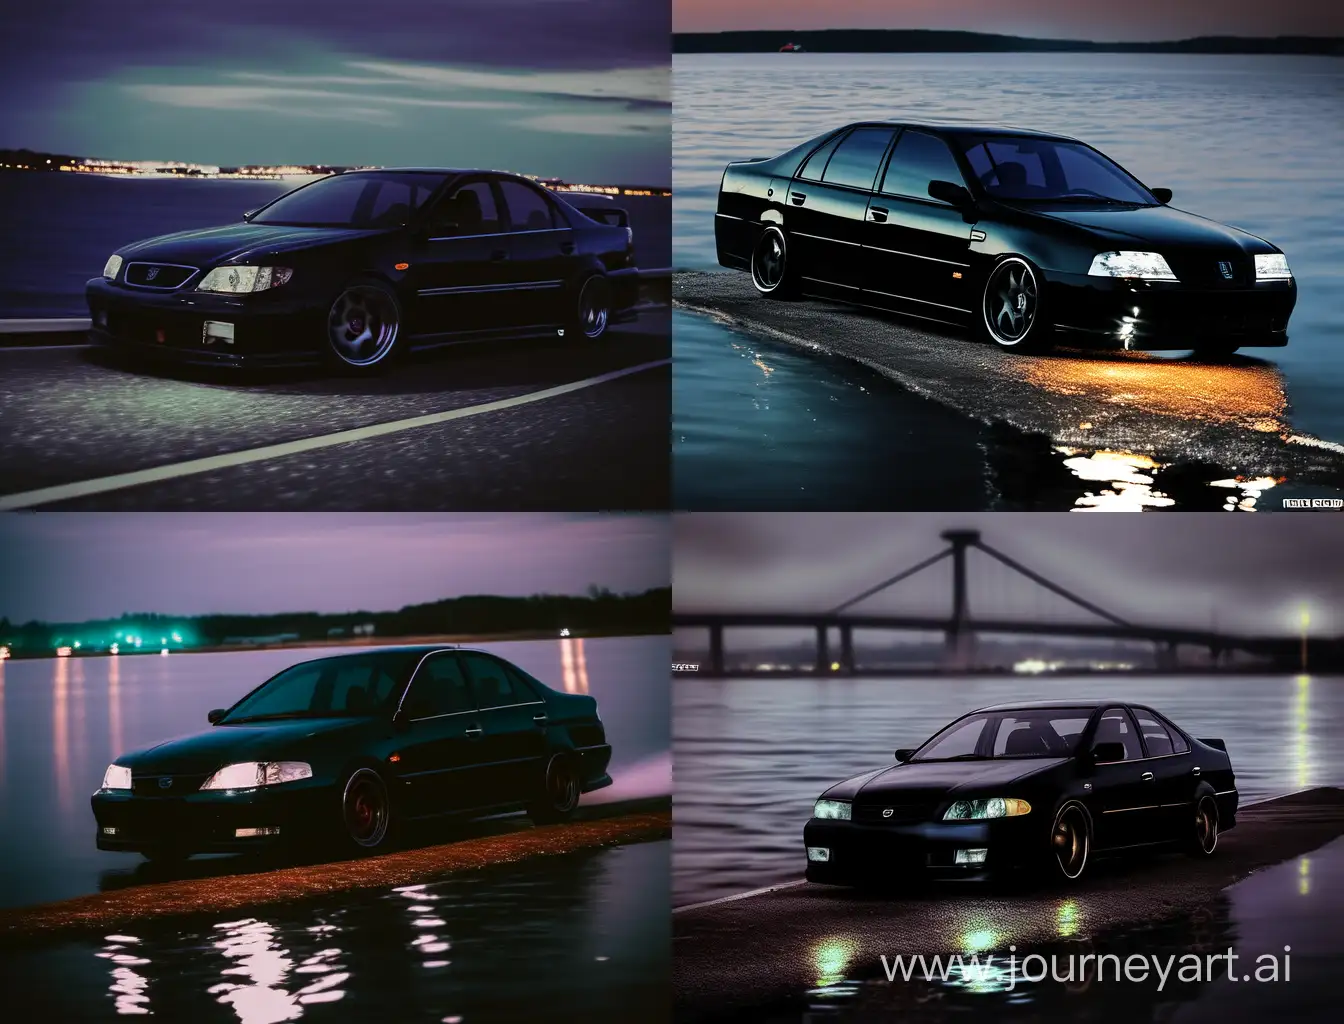 Black-Nissan-Primera-P10-and-Alrosa-Submarine-Merge-in-Stunning-Composition